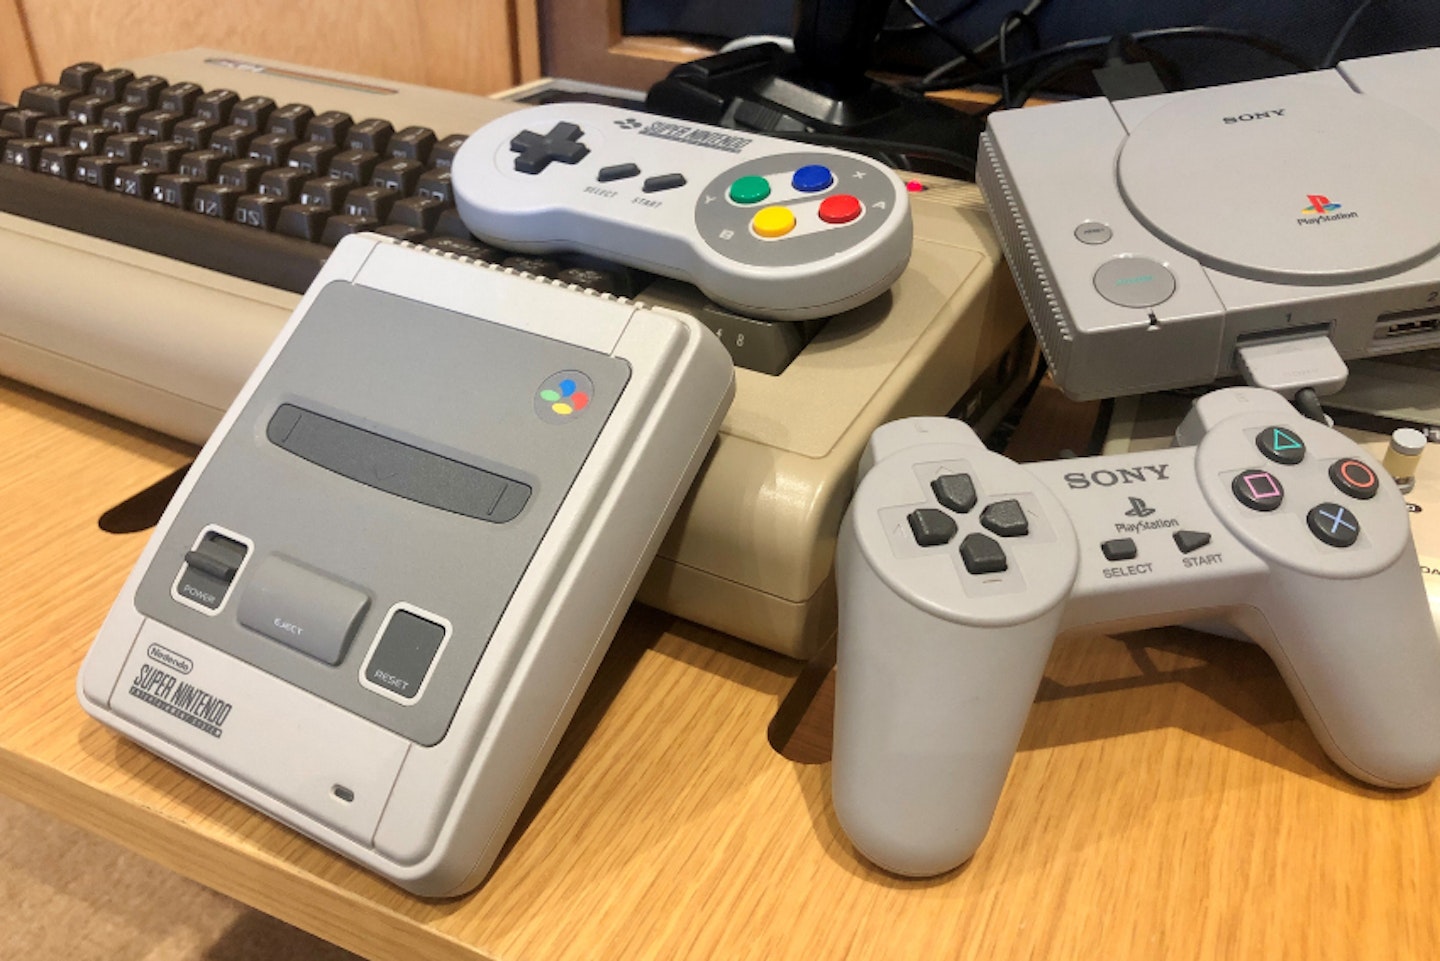 A FULL-SIZE THEC64 WITH SNES MINI AND PLAYSTATION CLASSI